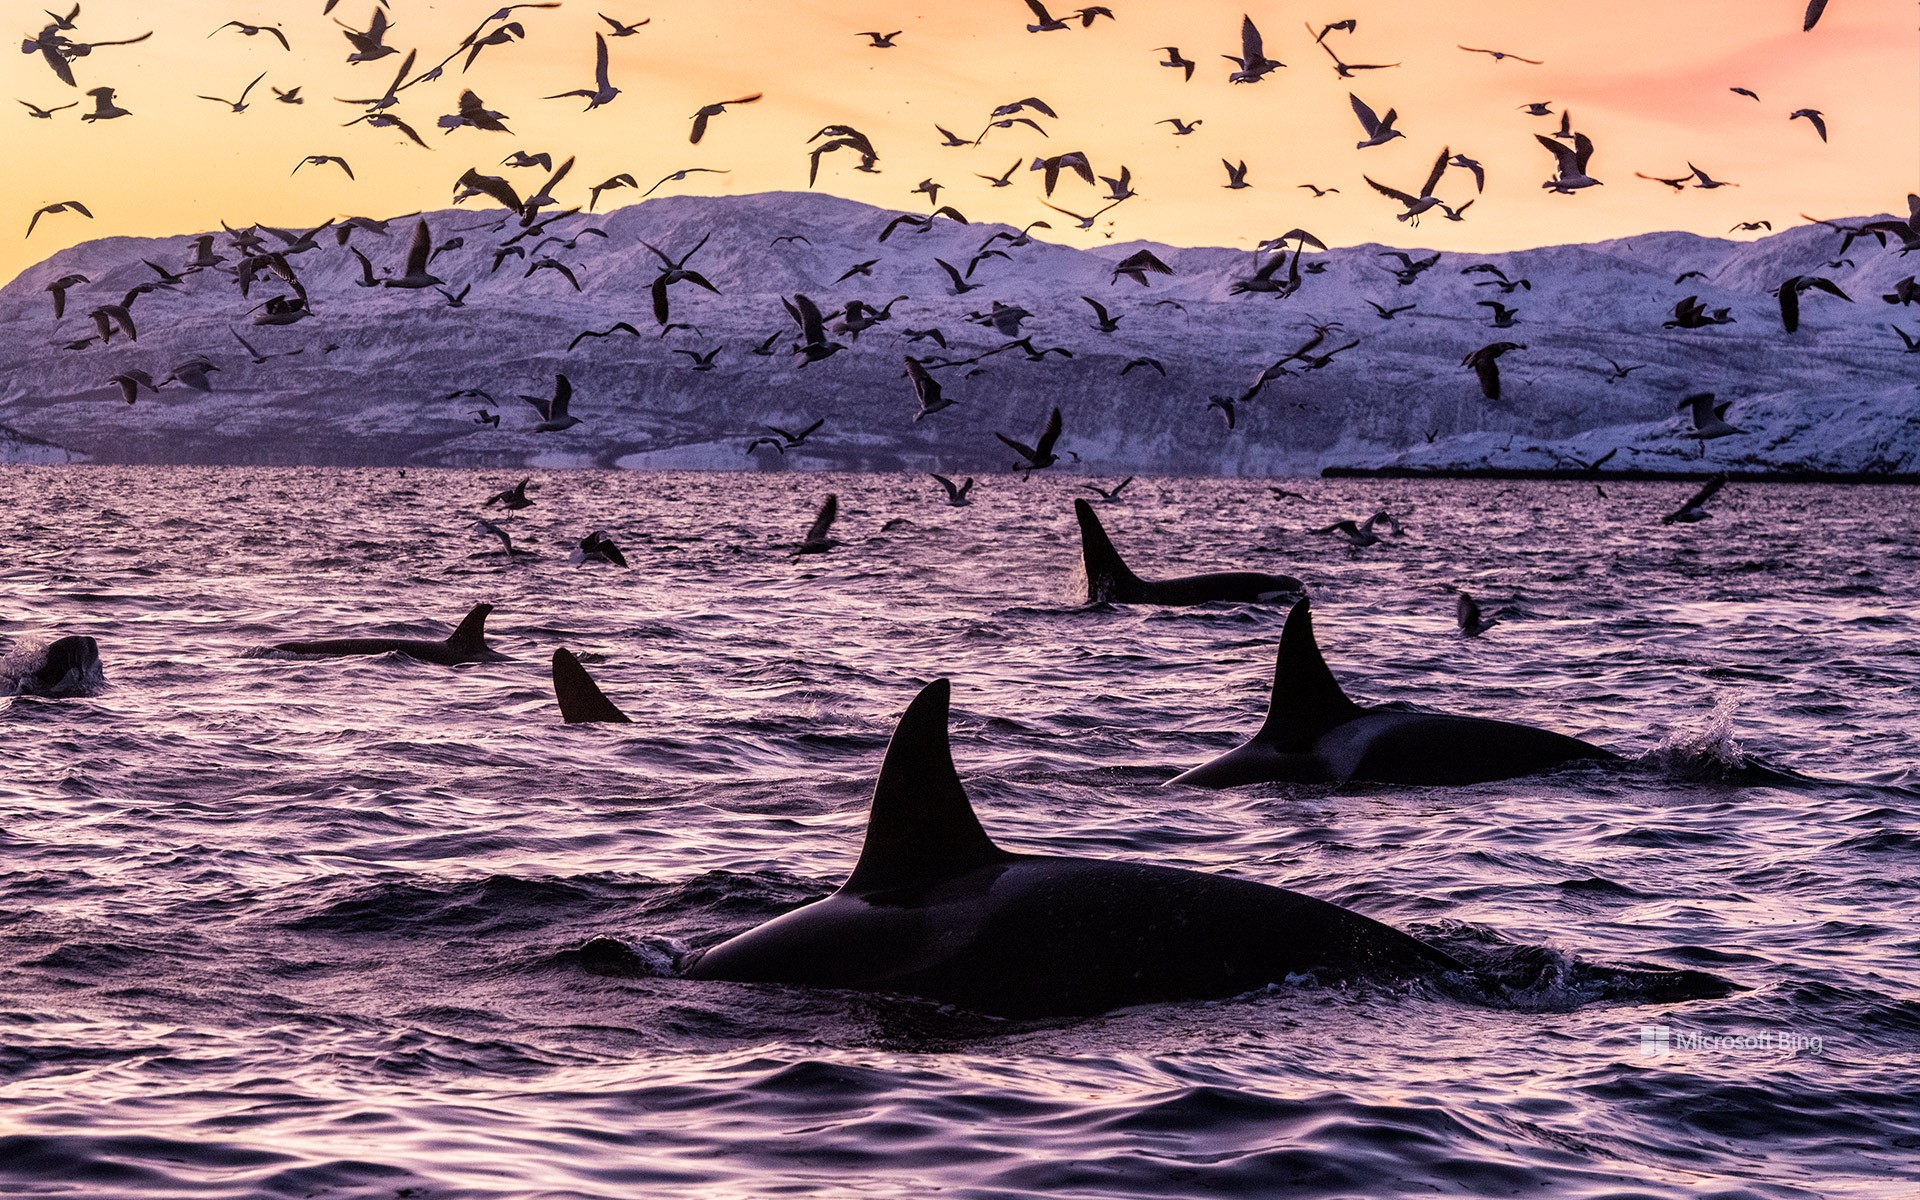 Killer whales in the waters off Spildra, Norway